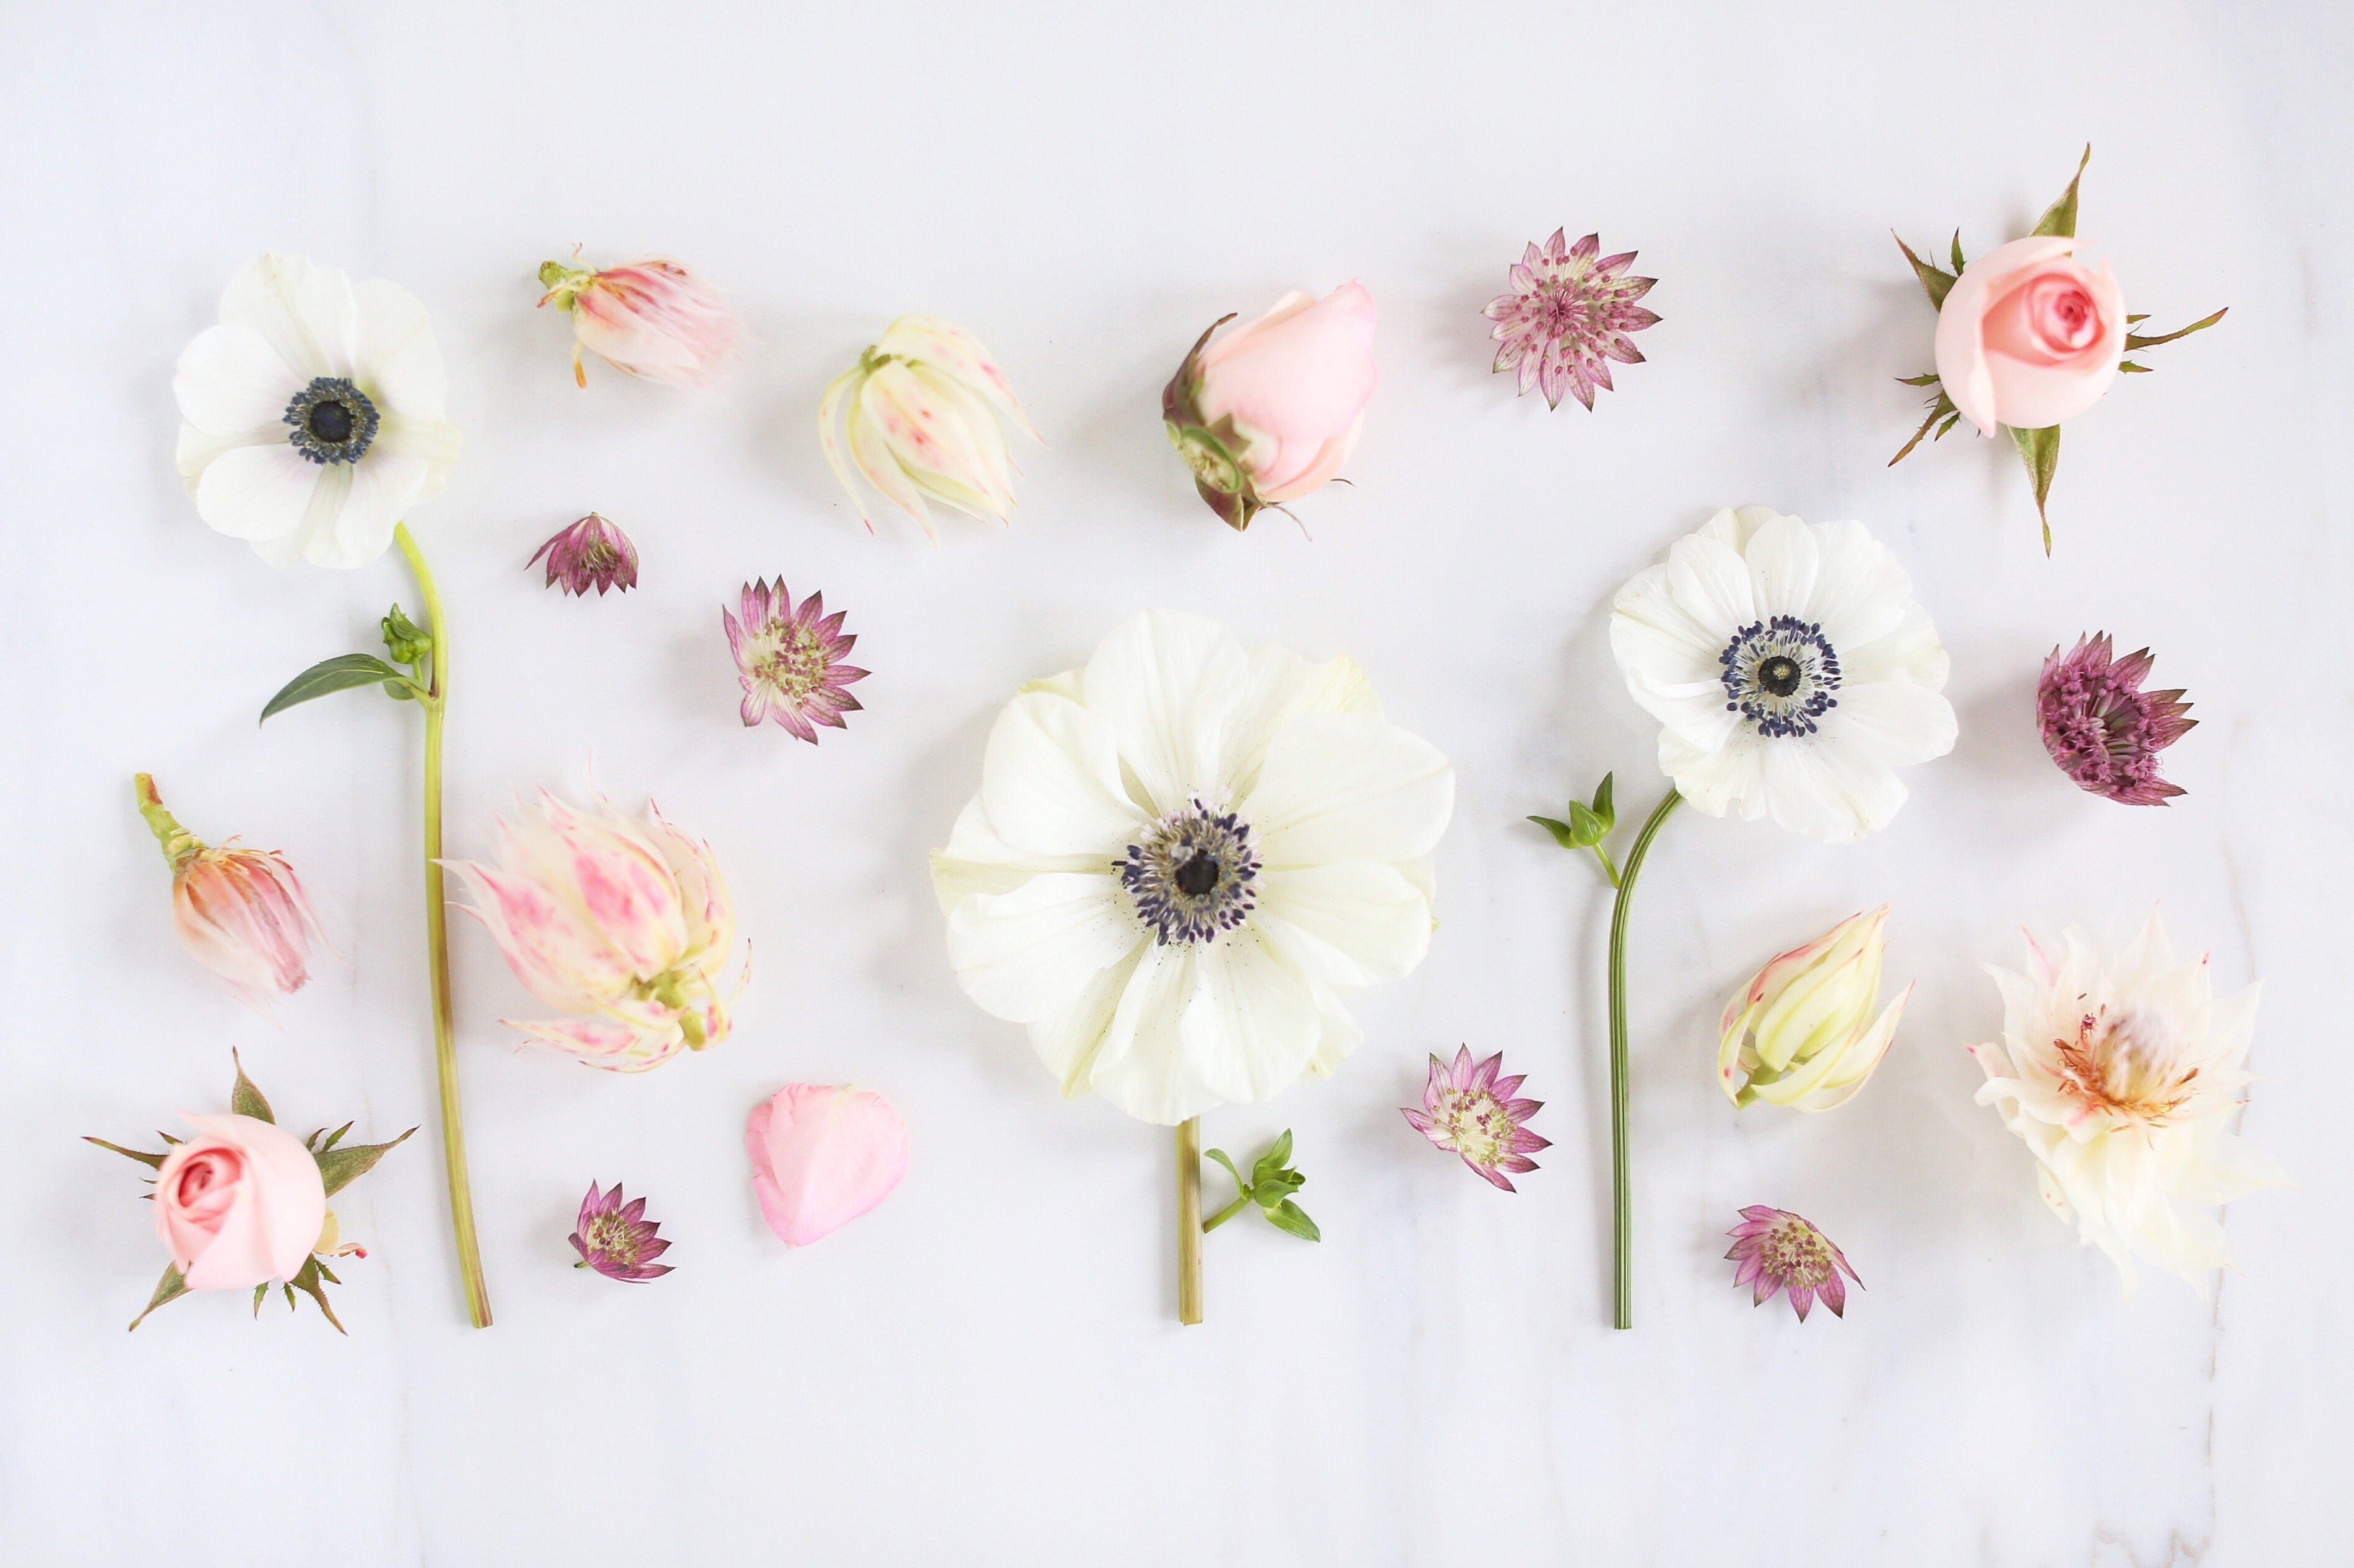 25 Perfect wallpaper aesthetic flowers You Can Use It Free Of Charge ...